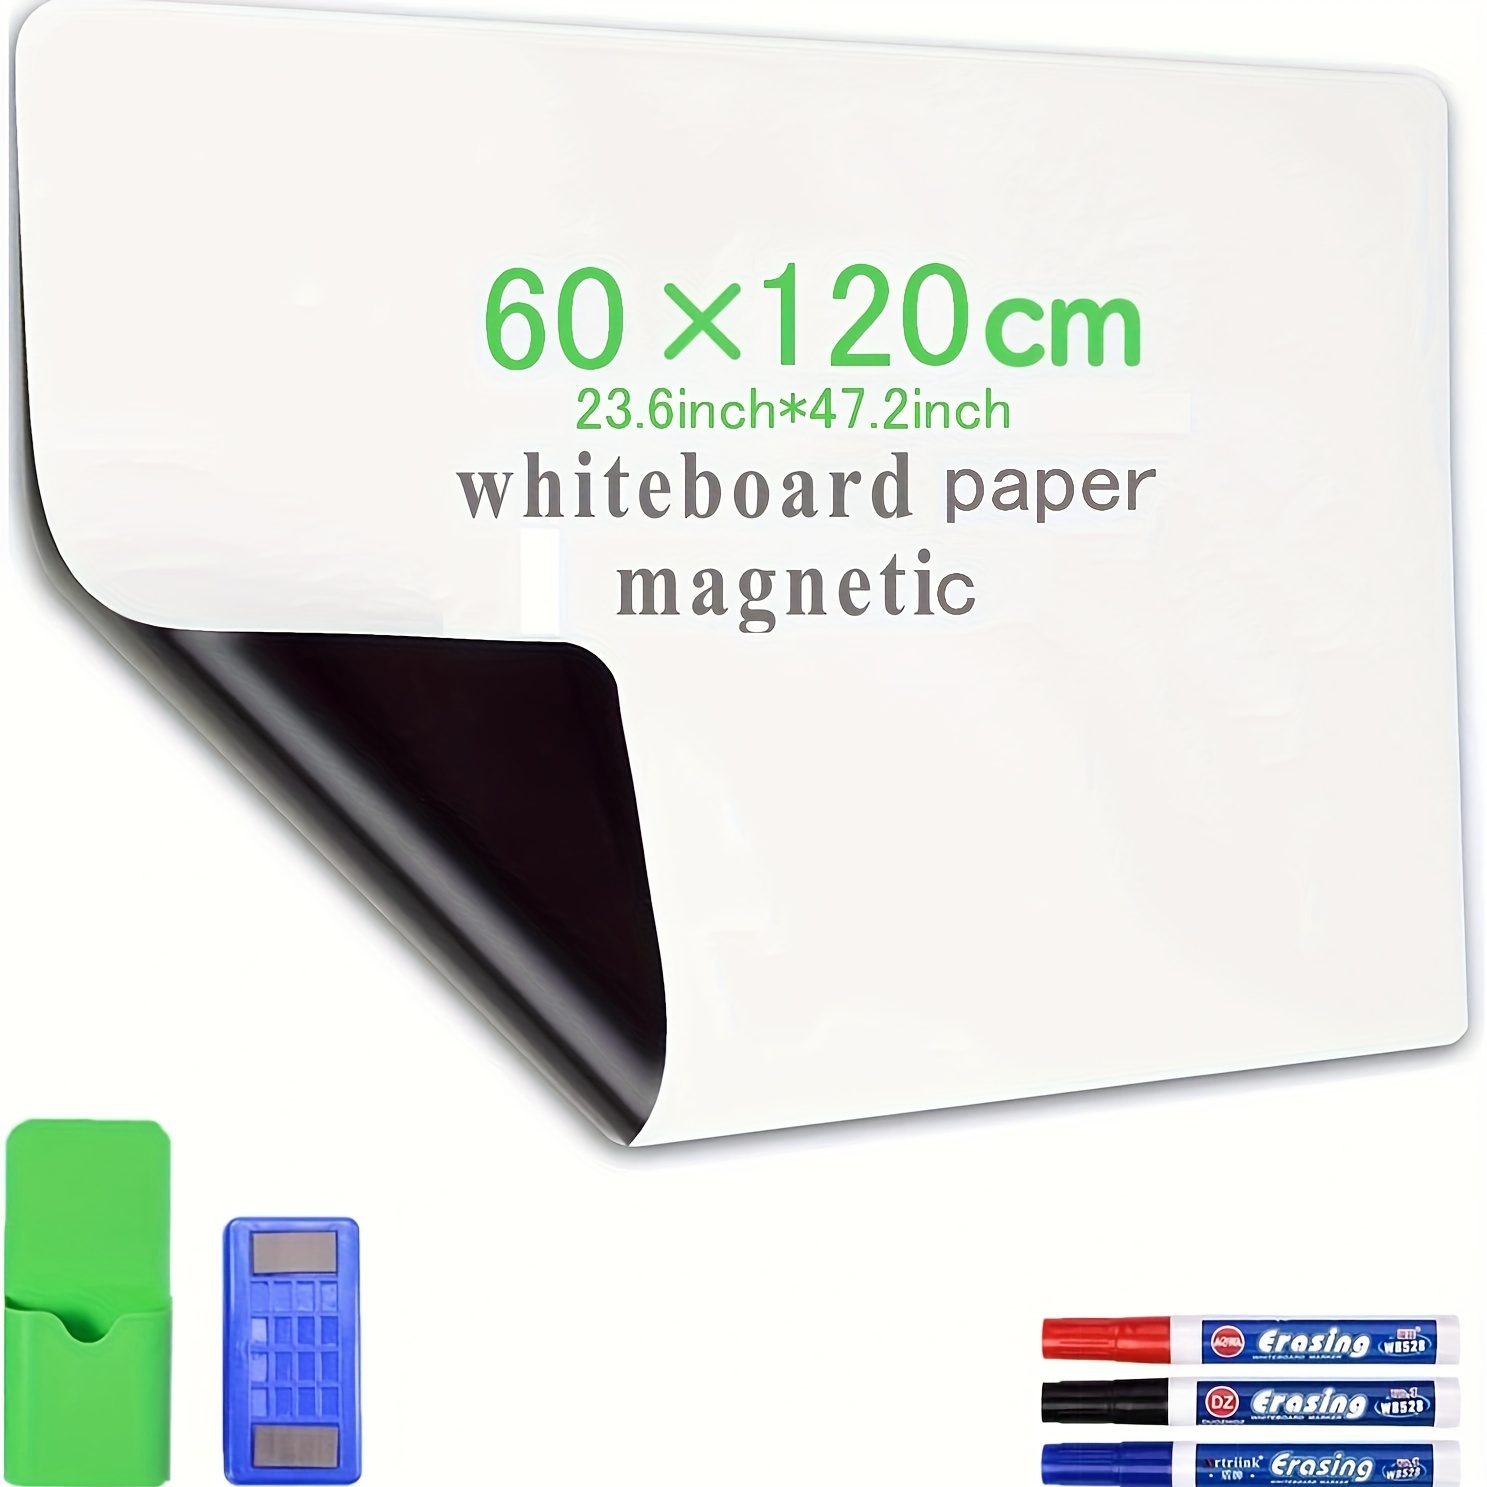 Self-Adhesive Whiteboard Wall Decal Sticker, 78.7” × 23.6” Extra Large  Strong & Durable Dry Erase Wall Paper Message Board